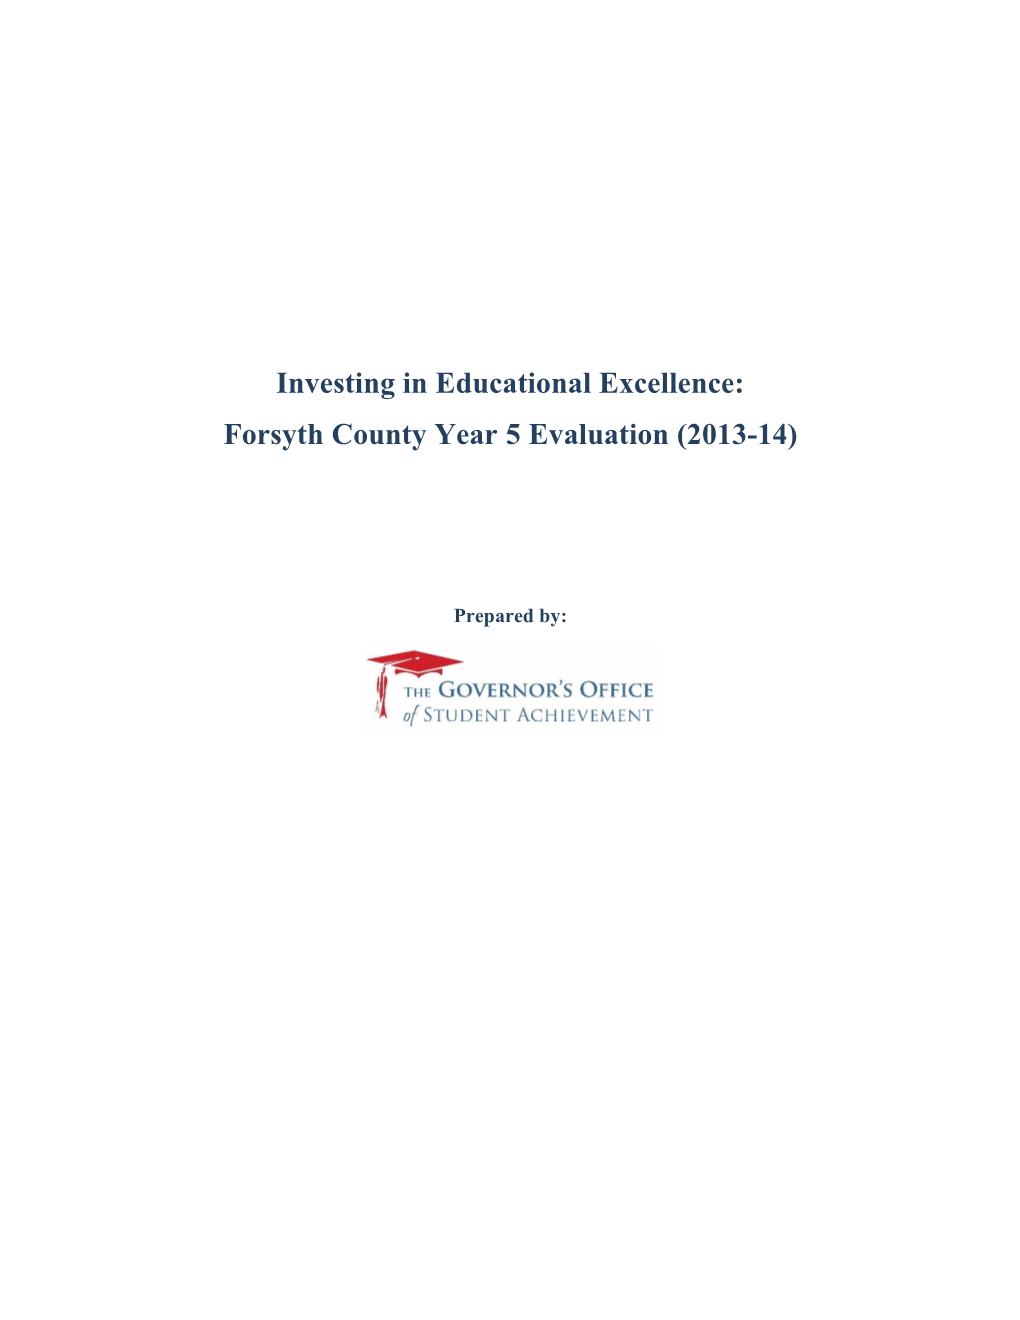 Forsyth County Year 5 Evaluation (2013-14)